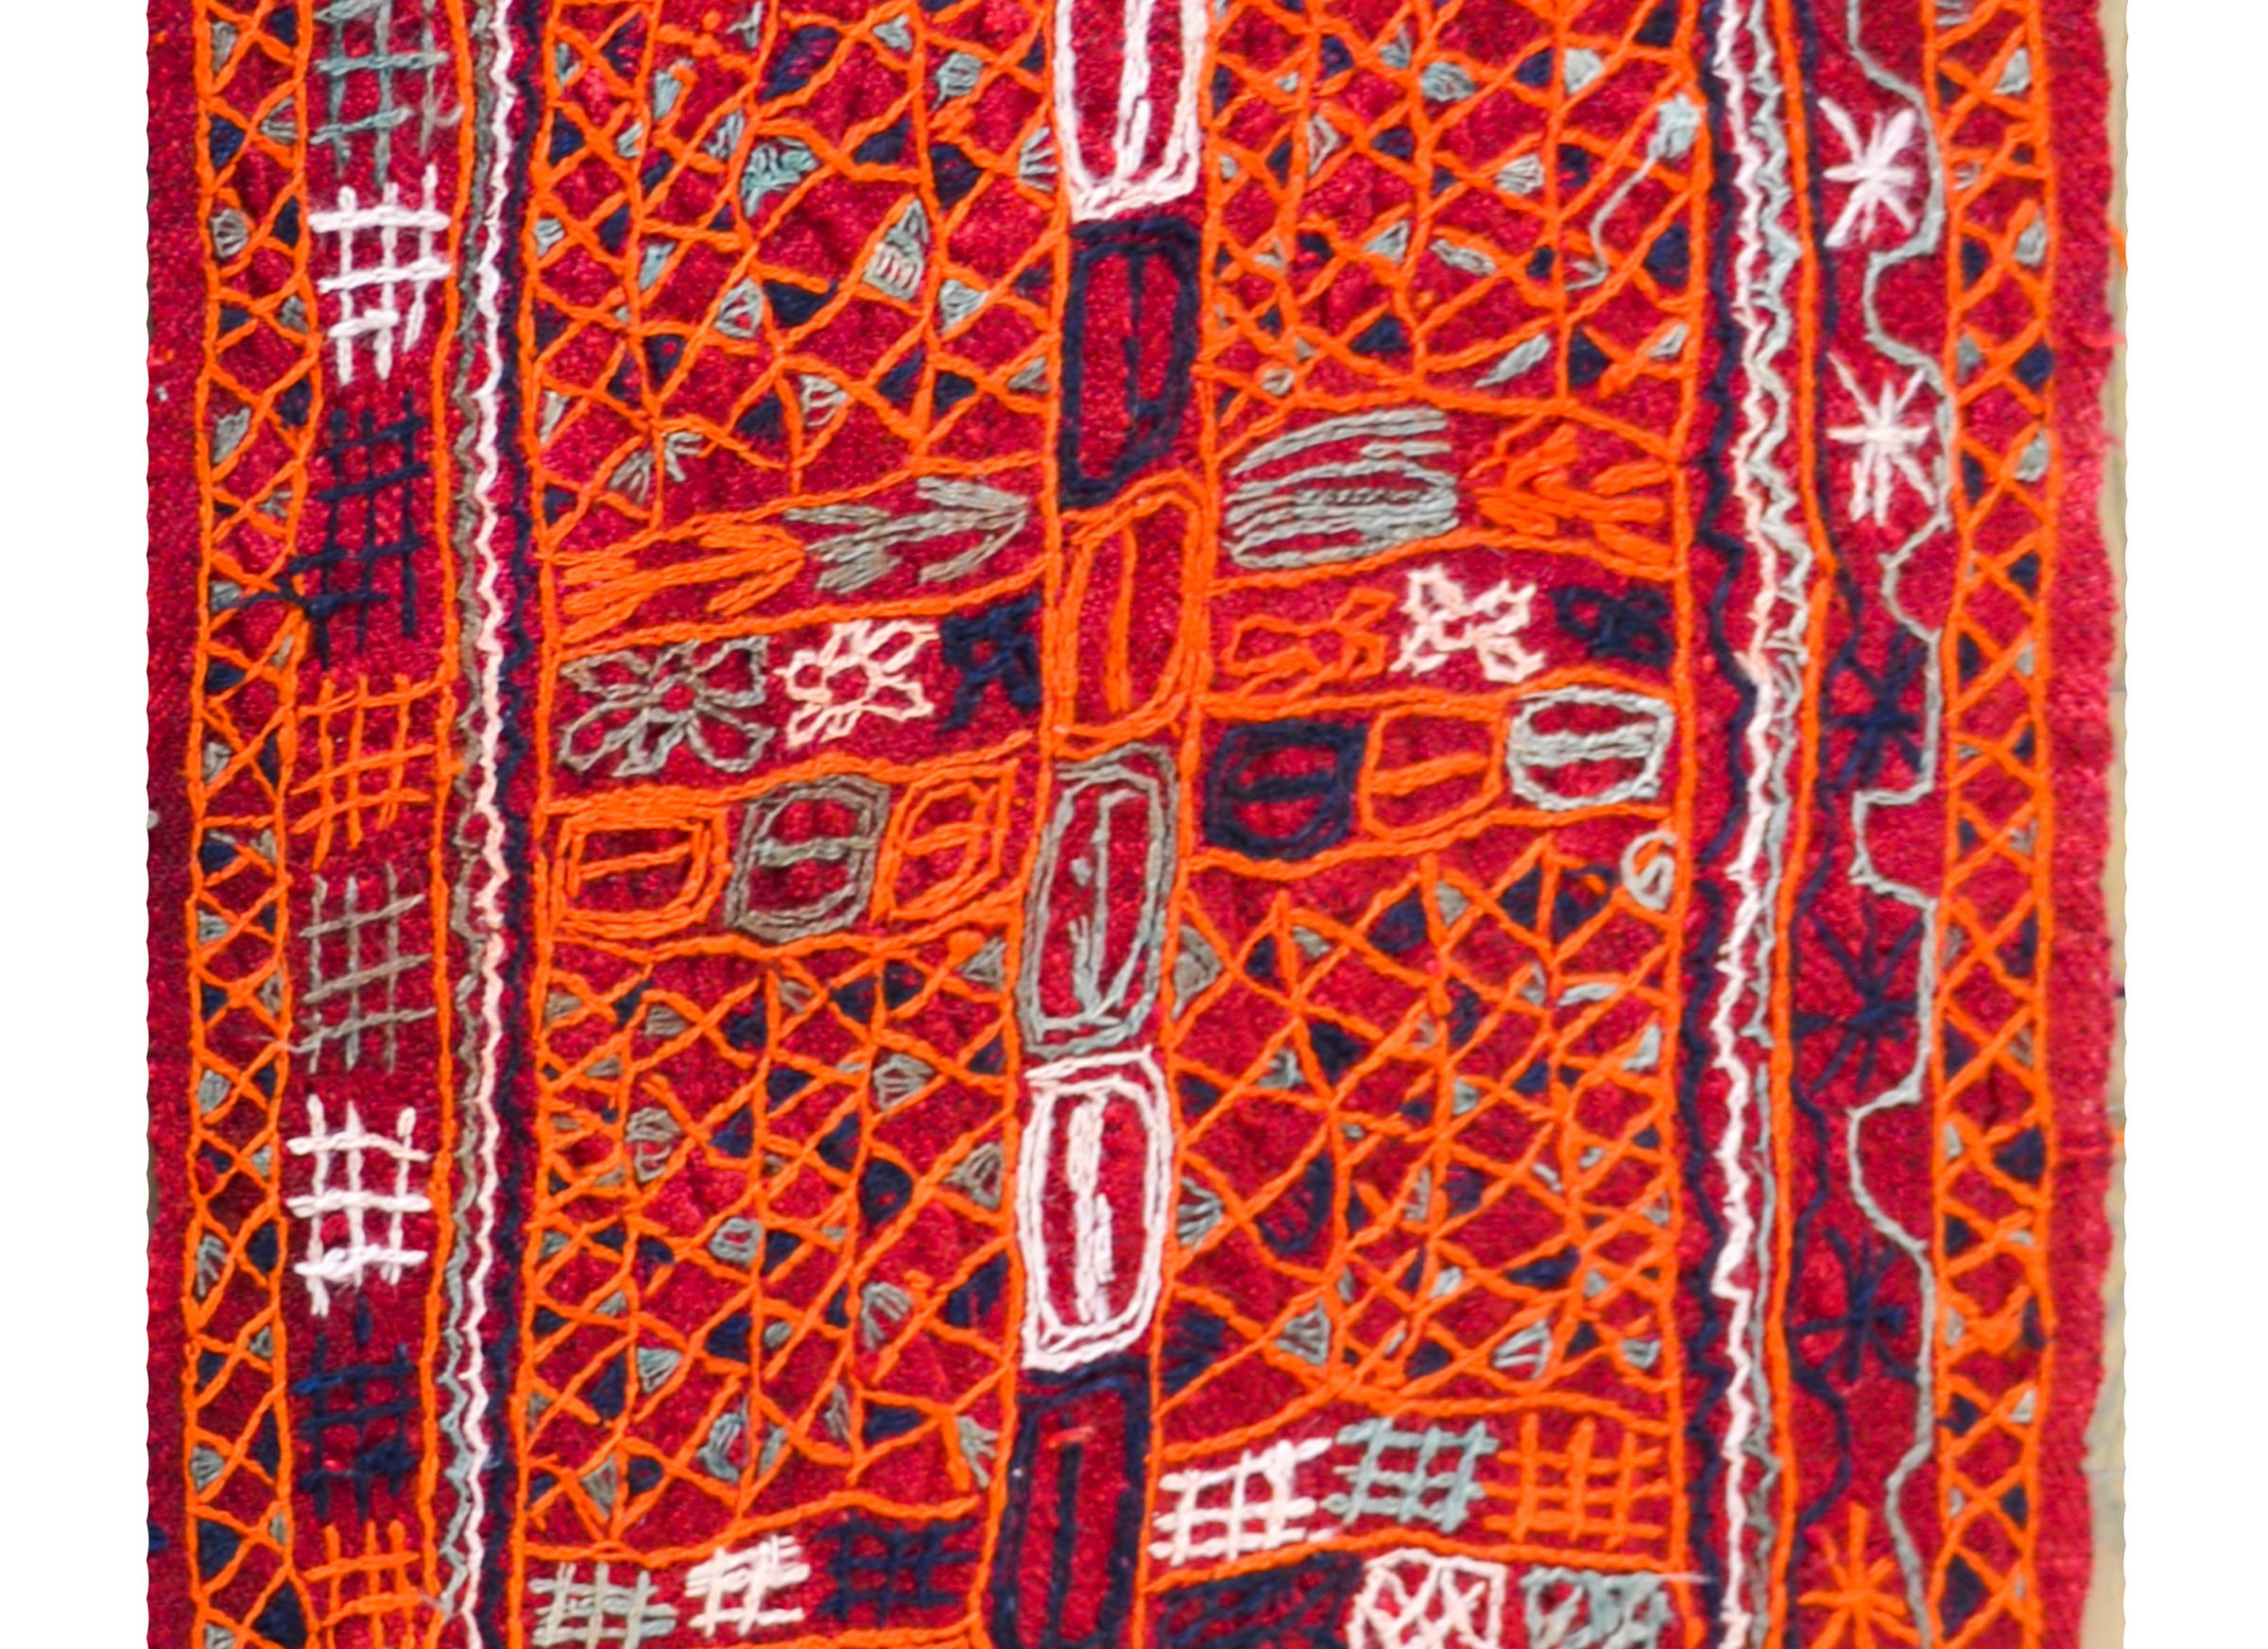 A striking late 20th century Iraqi handwoven crimson wool panel with all-over embroidered geometric patterns stitched in brilliant orange, indigo, white, and gray cotton thread.